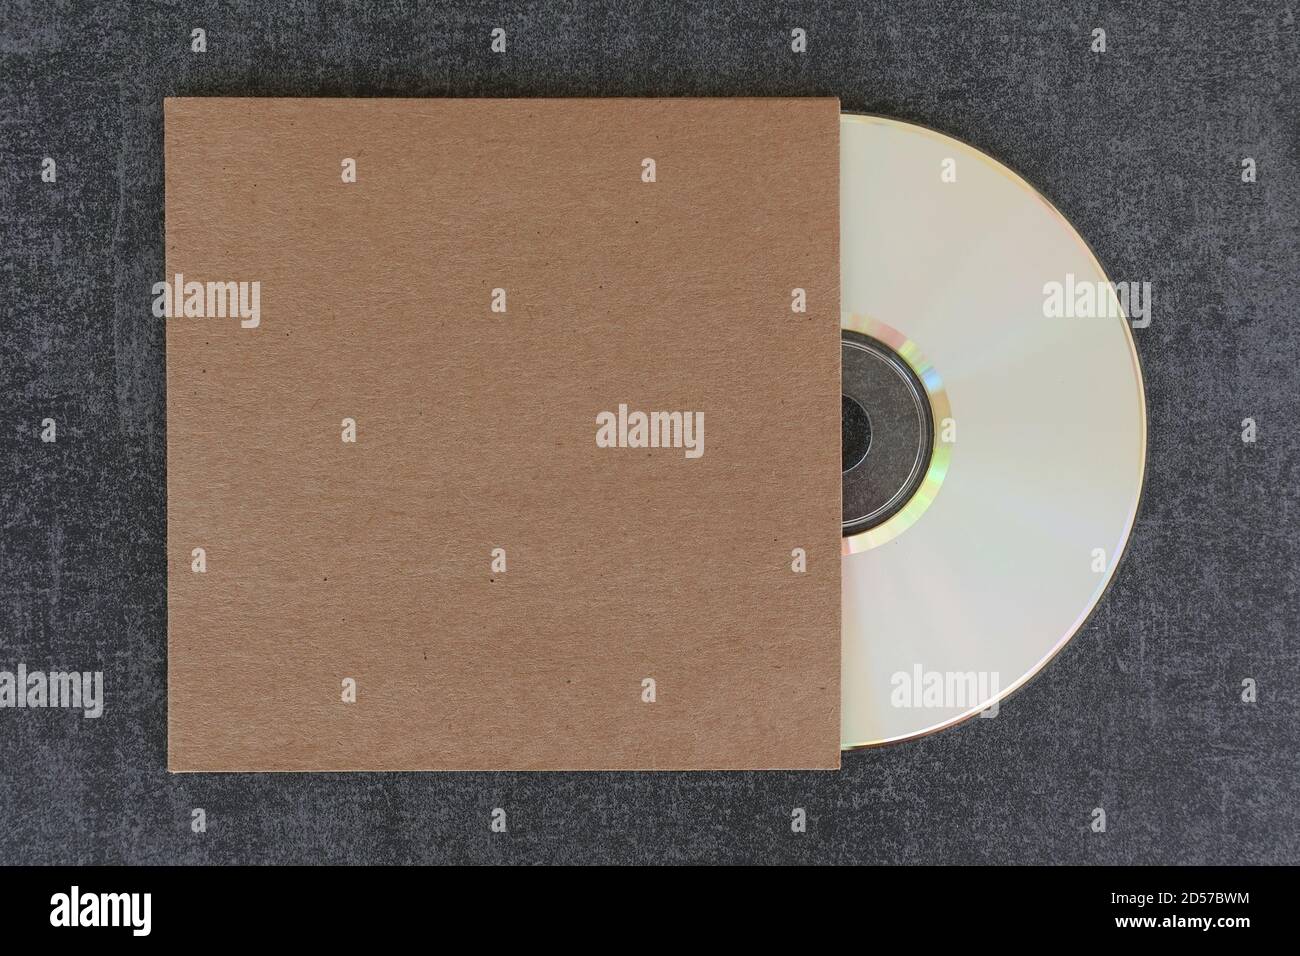 Blank white label compact disc cd and generic brown cardboard sleeve with copy-space to overlay your design. Stock Photo